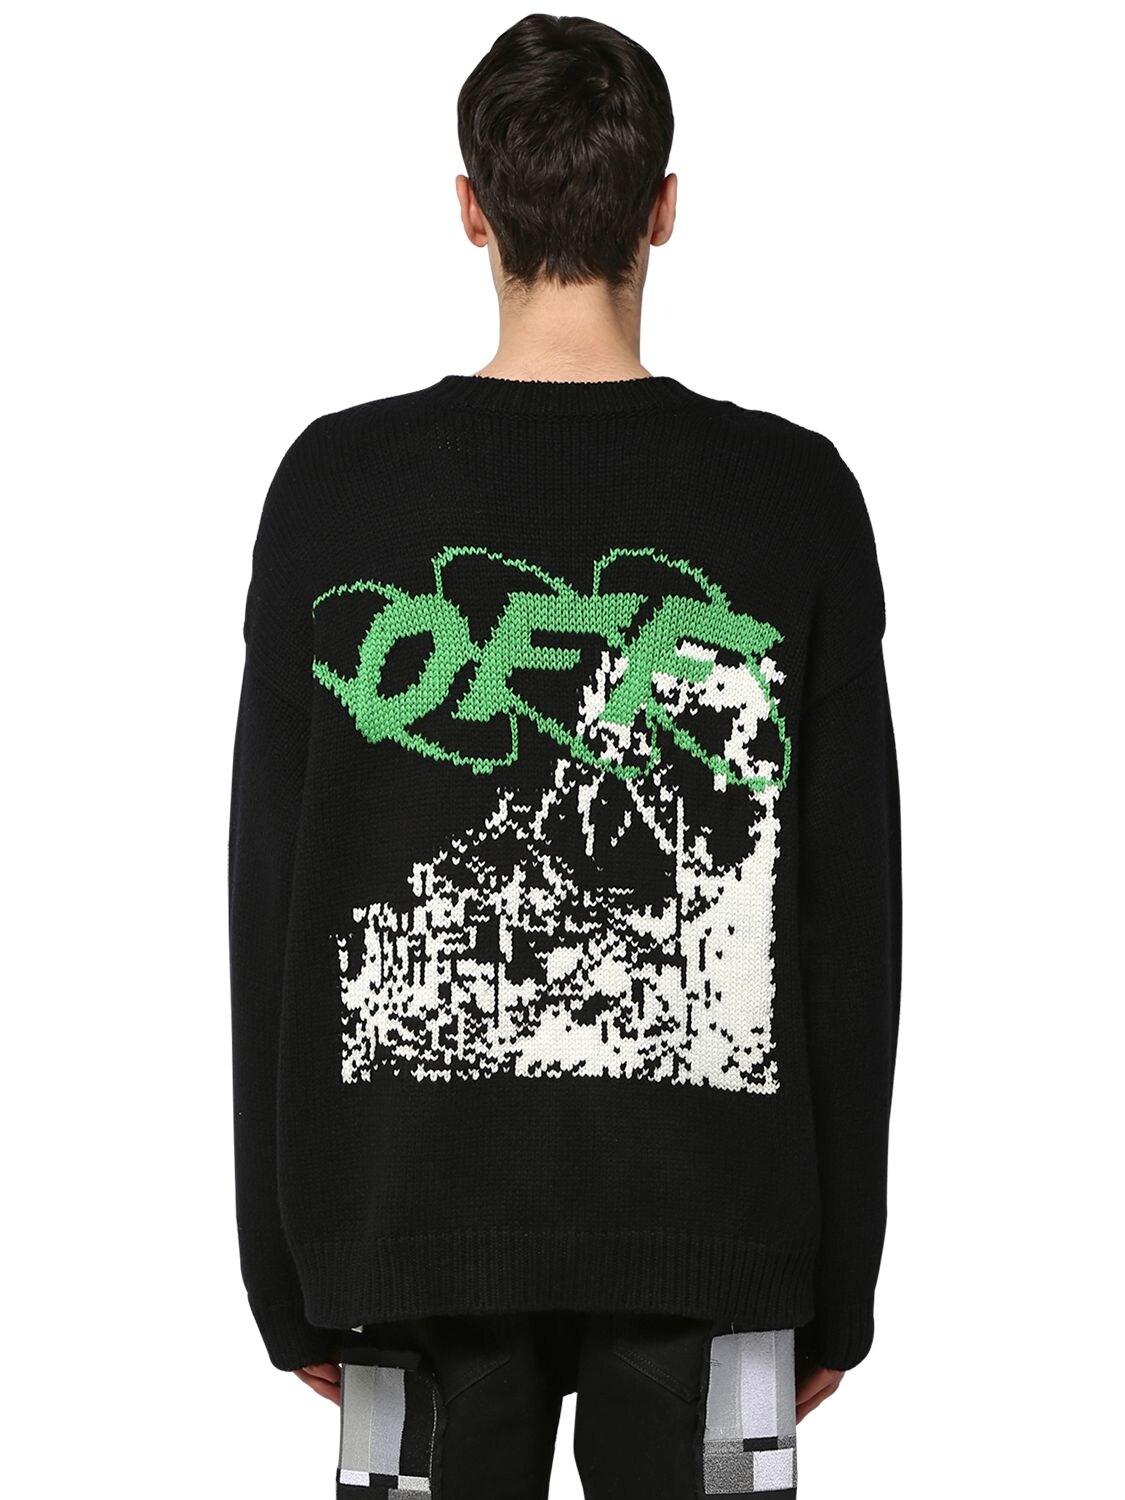 Off-White c/o Virgil Abloh Ruined Factory Intarsia Sweater in Black for Lyst